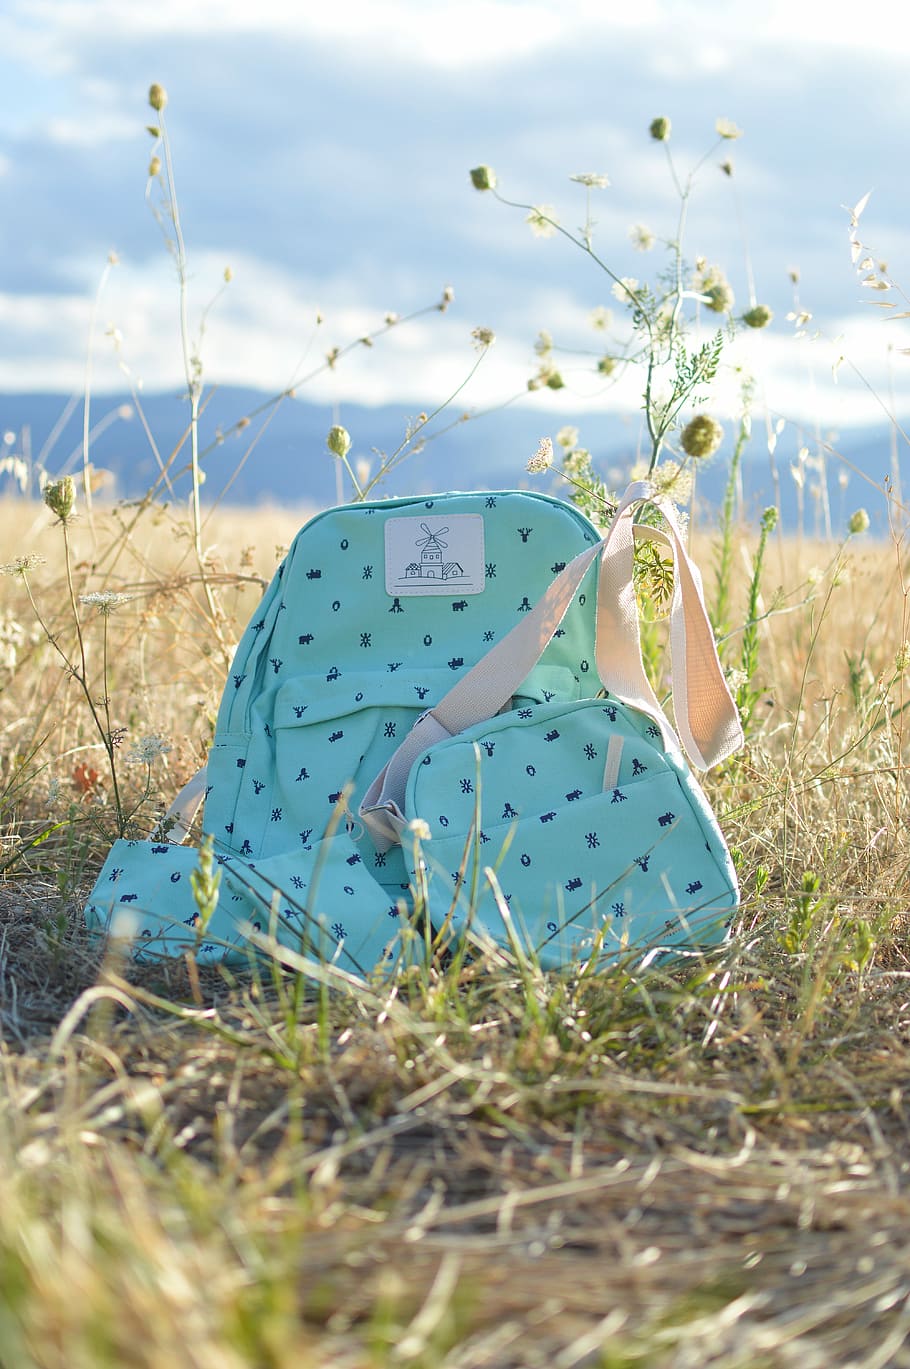 green leather backpack beside crossbody bag on grass field during daytime, teal backpack and crossbody on grass field